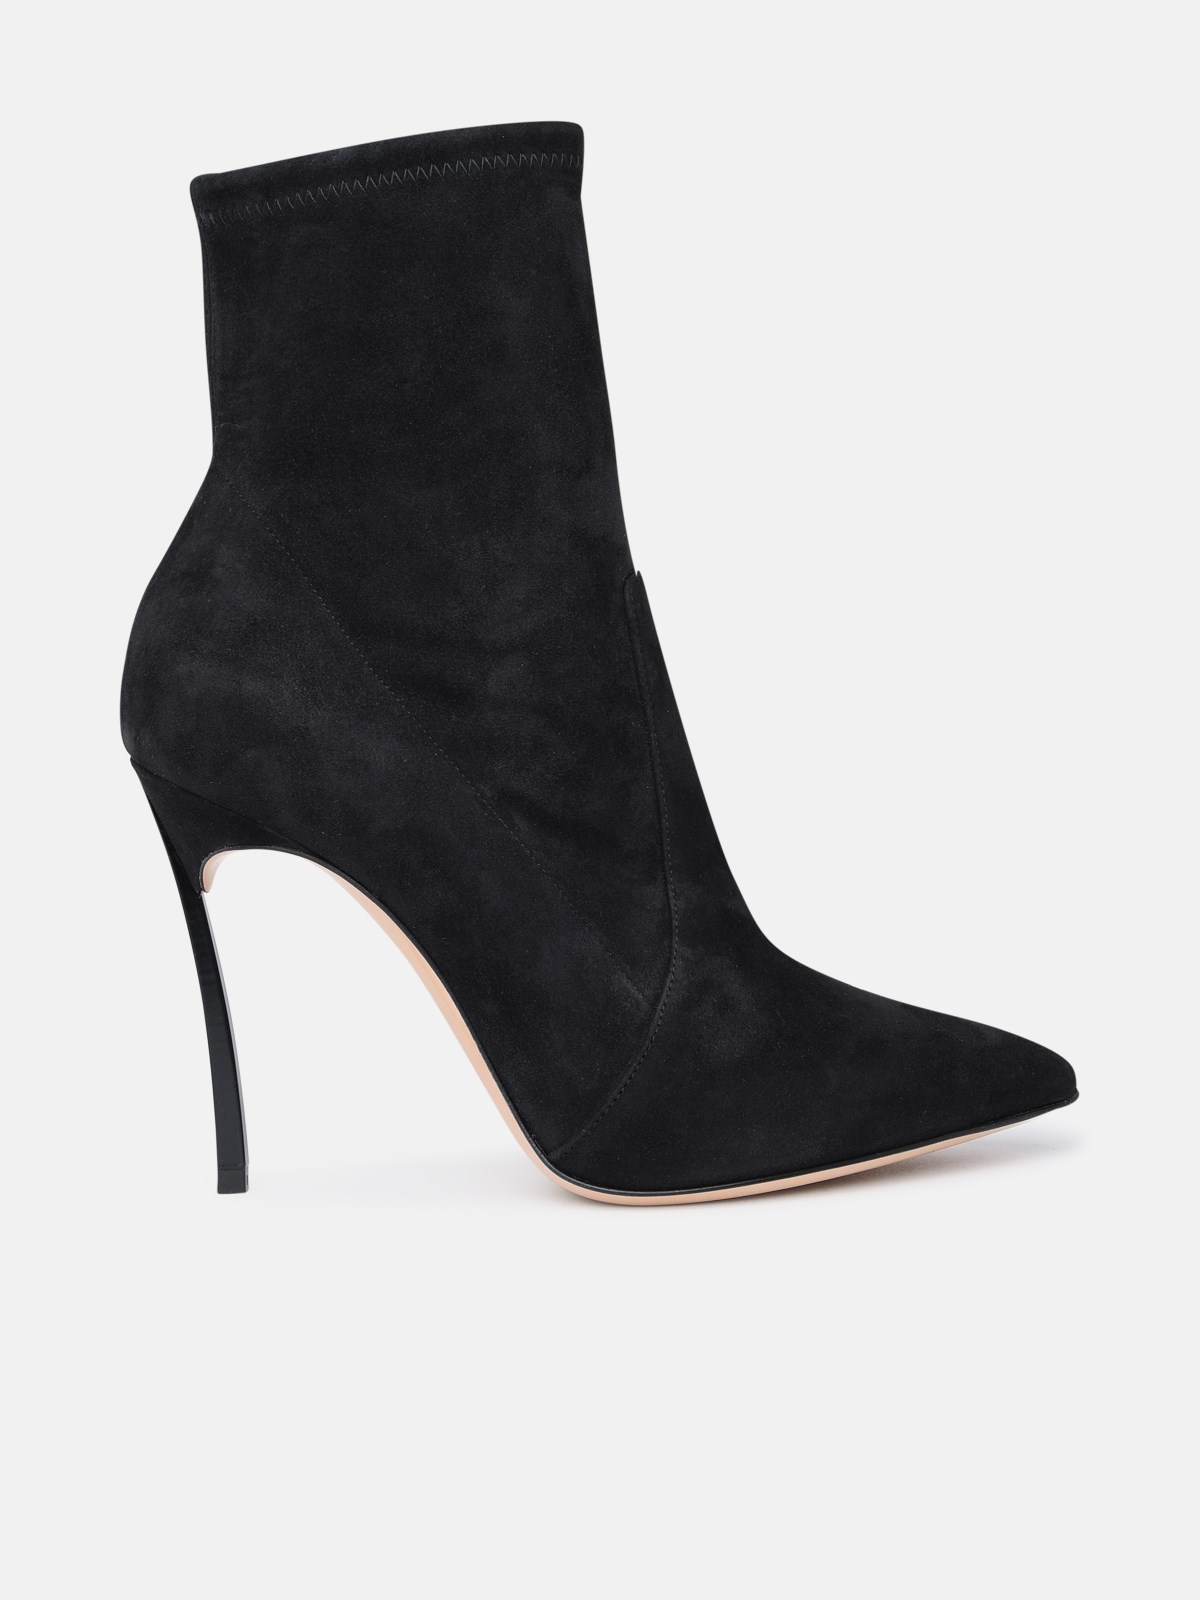 Casadei Black Suede Blade Ankle Boots